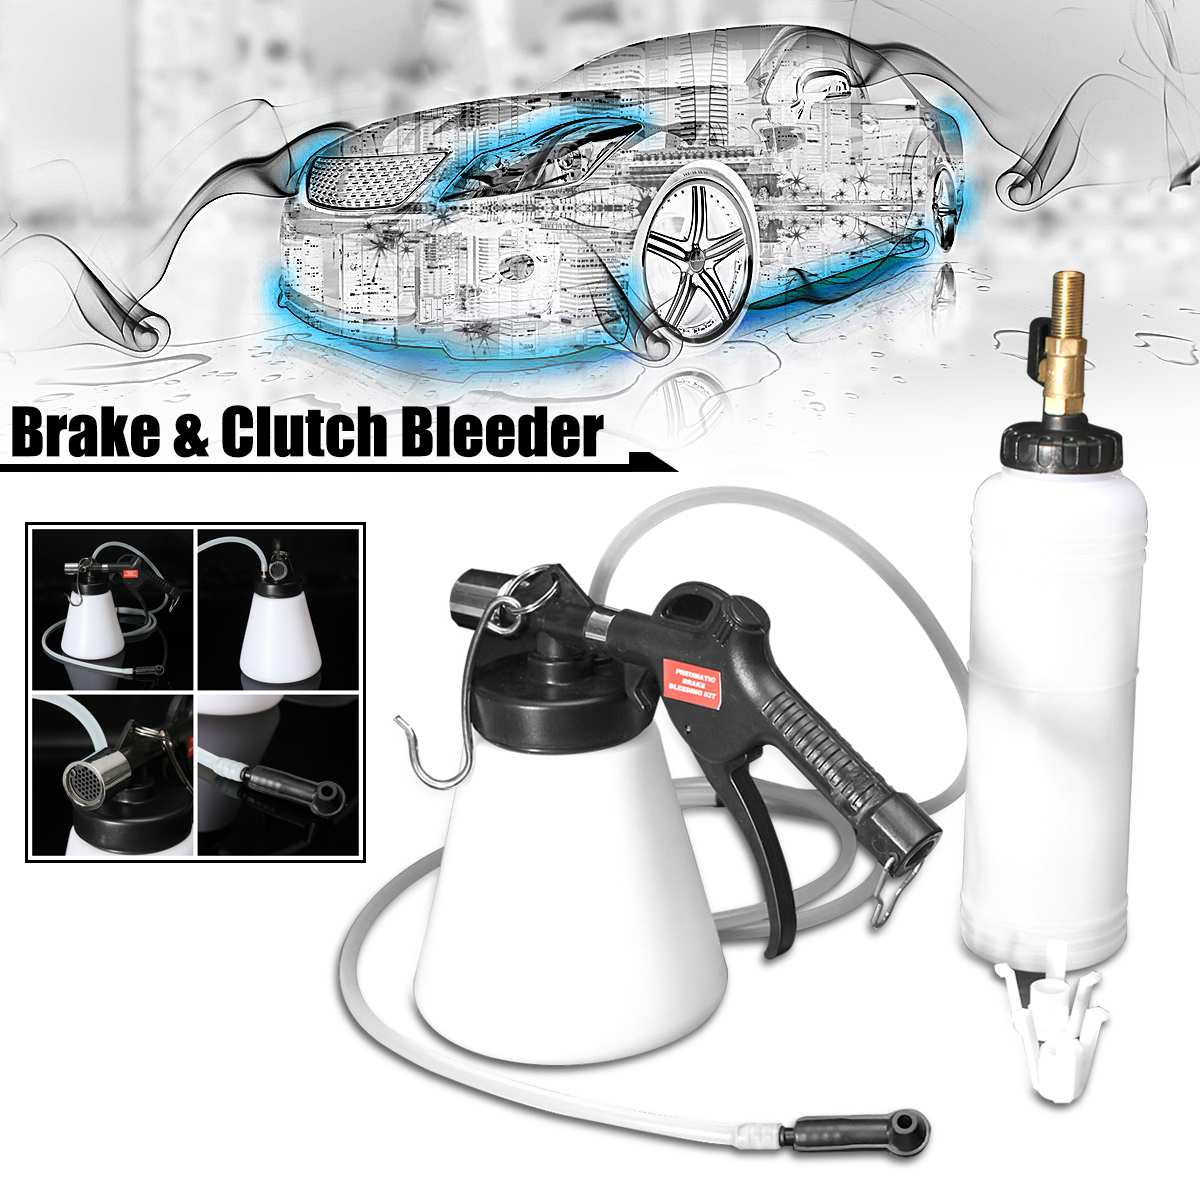 Auto Car Brake Fluid Replacement Tool 0.75L Large Capacity Brake Fluid Drained Bleeder Oil Change Container Kit for Cars Trucks